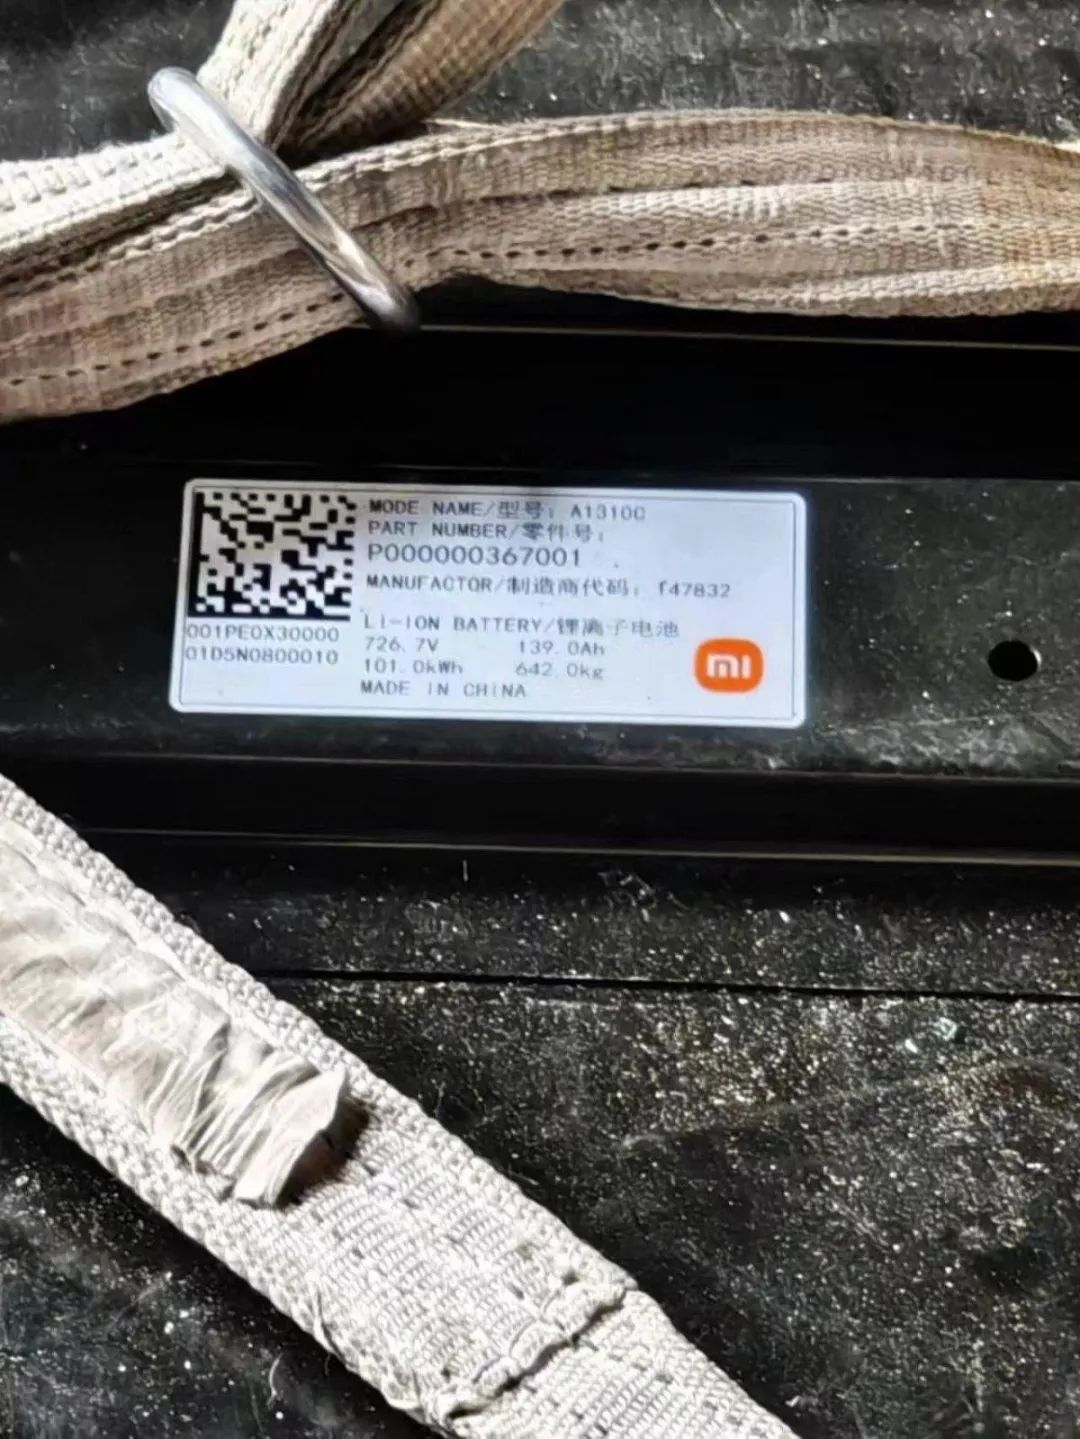 Xiaomi car battery exposure: comprehensive battery life may reach more than 600km